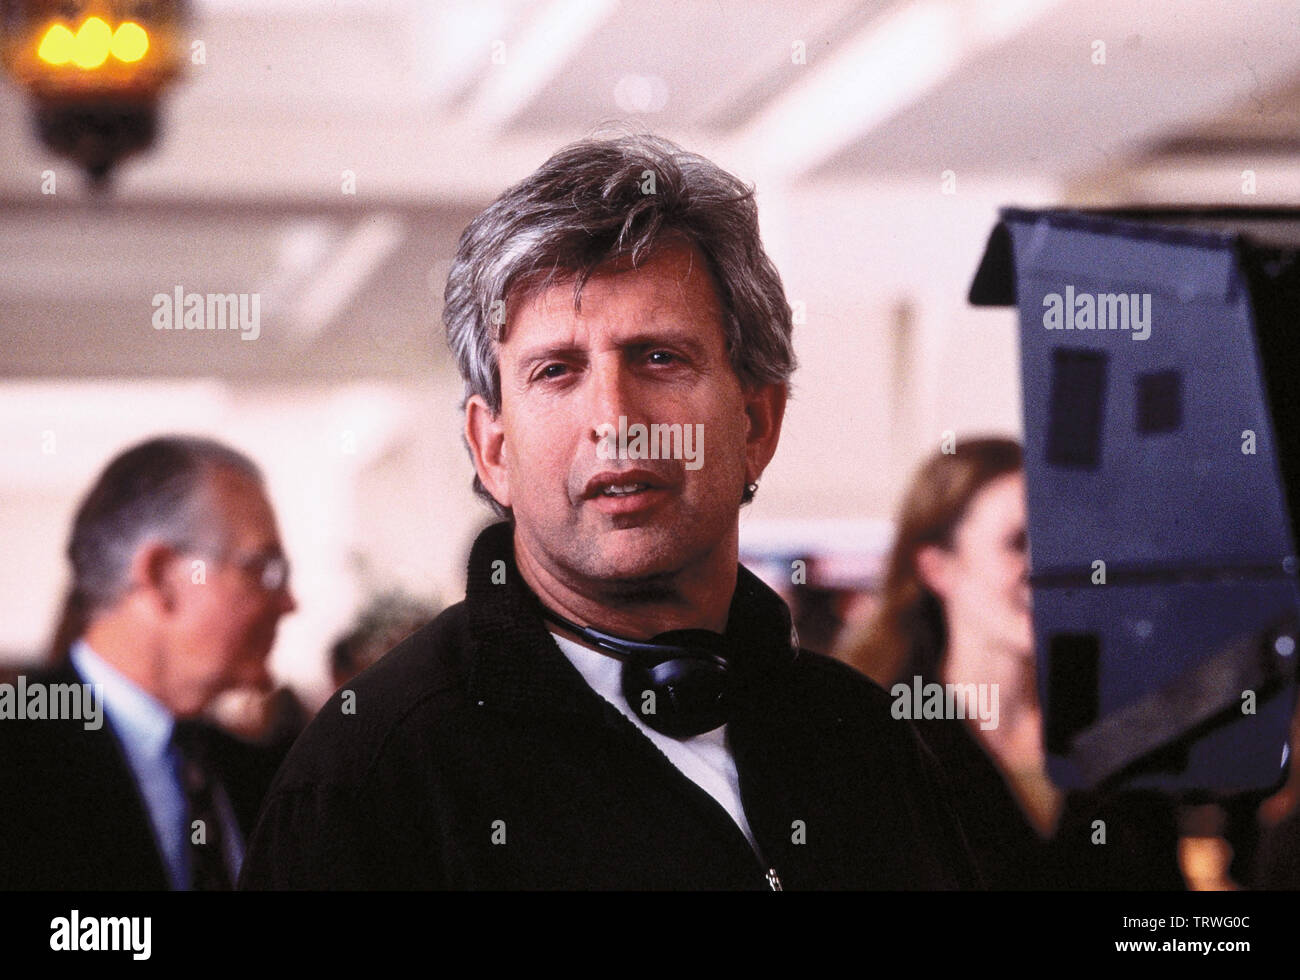 JOE ROTH in AMERICA'S SWEETHEARTS (2001). Copyright: Editorial use only. No merchandising or book covers. This is a publicly distributed handout. Access rights only, no license of copyright provided. Only to be reproduced in conjunction with promotion of this film. Credit: REVOLUTION STUDIOS / GORDON, MELINDA SUE / Album Stock Photo